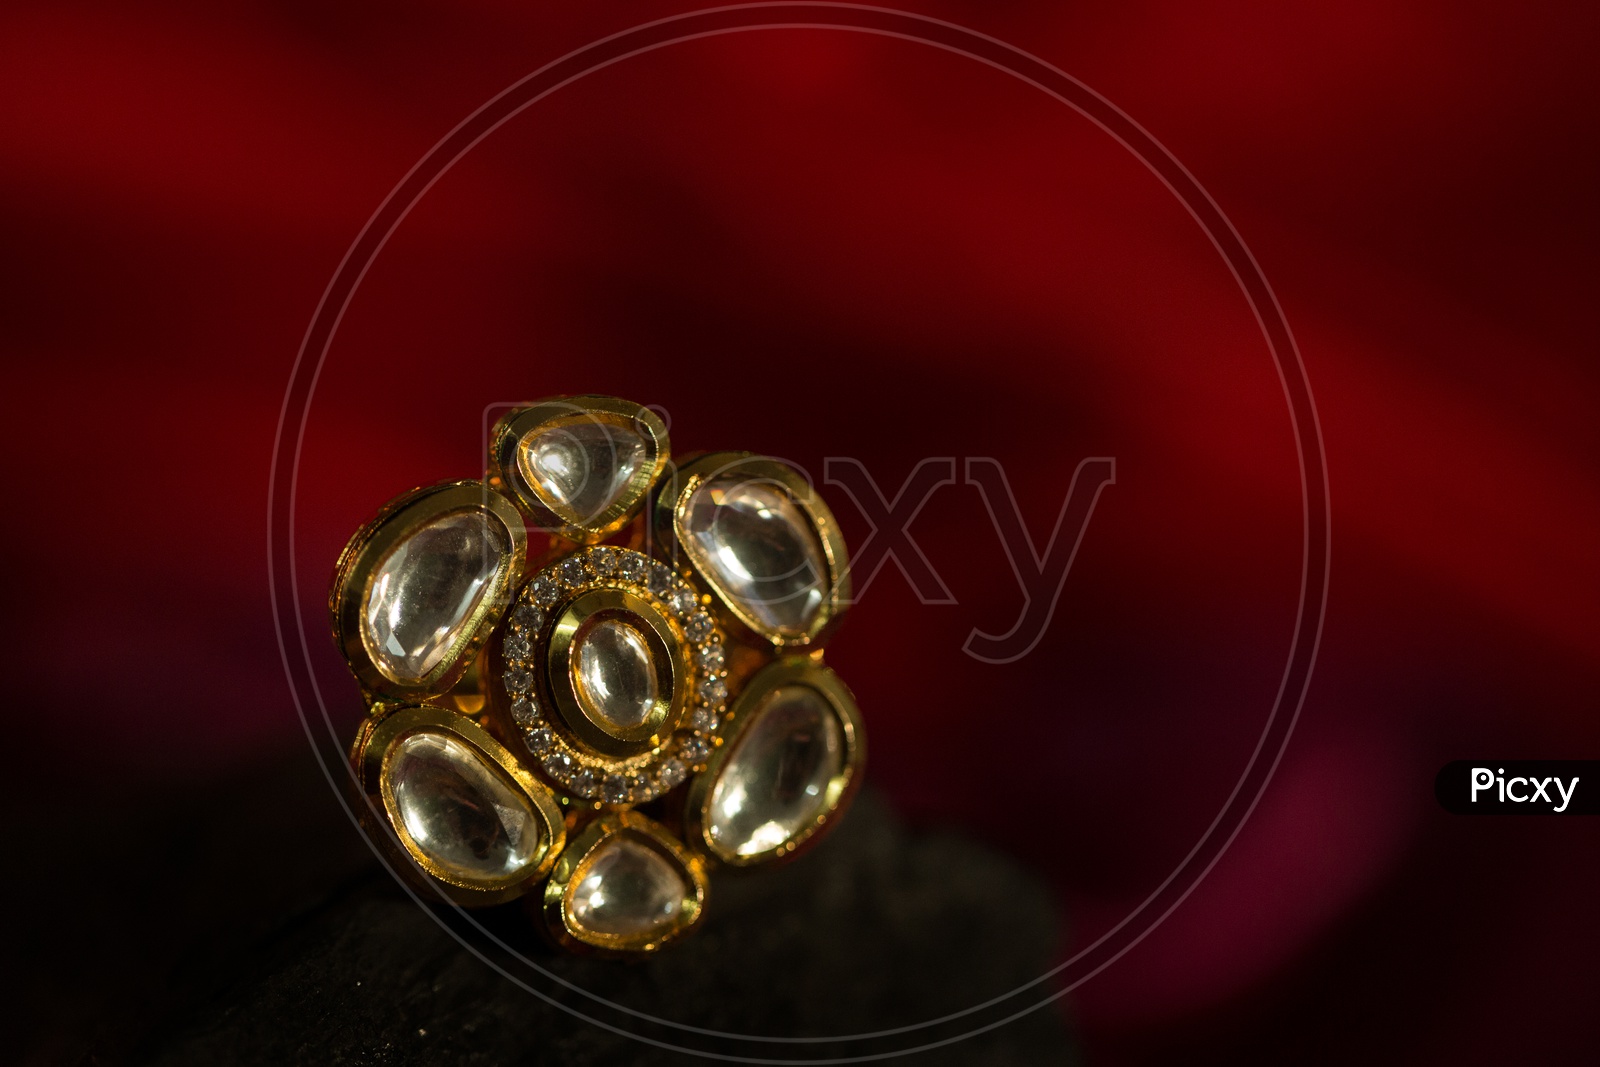 Indian Made Gold Jewellery Gold Ring With Design on it  Closeup Shot